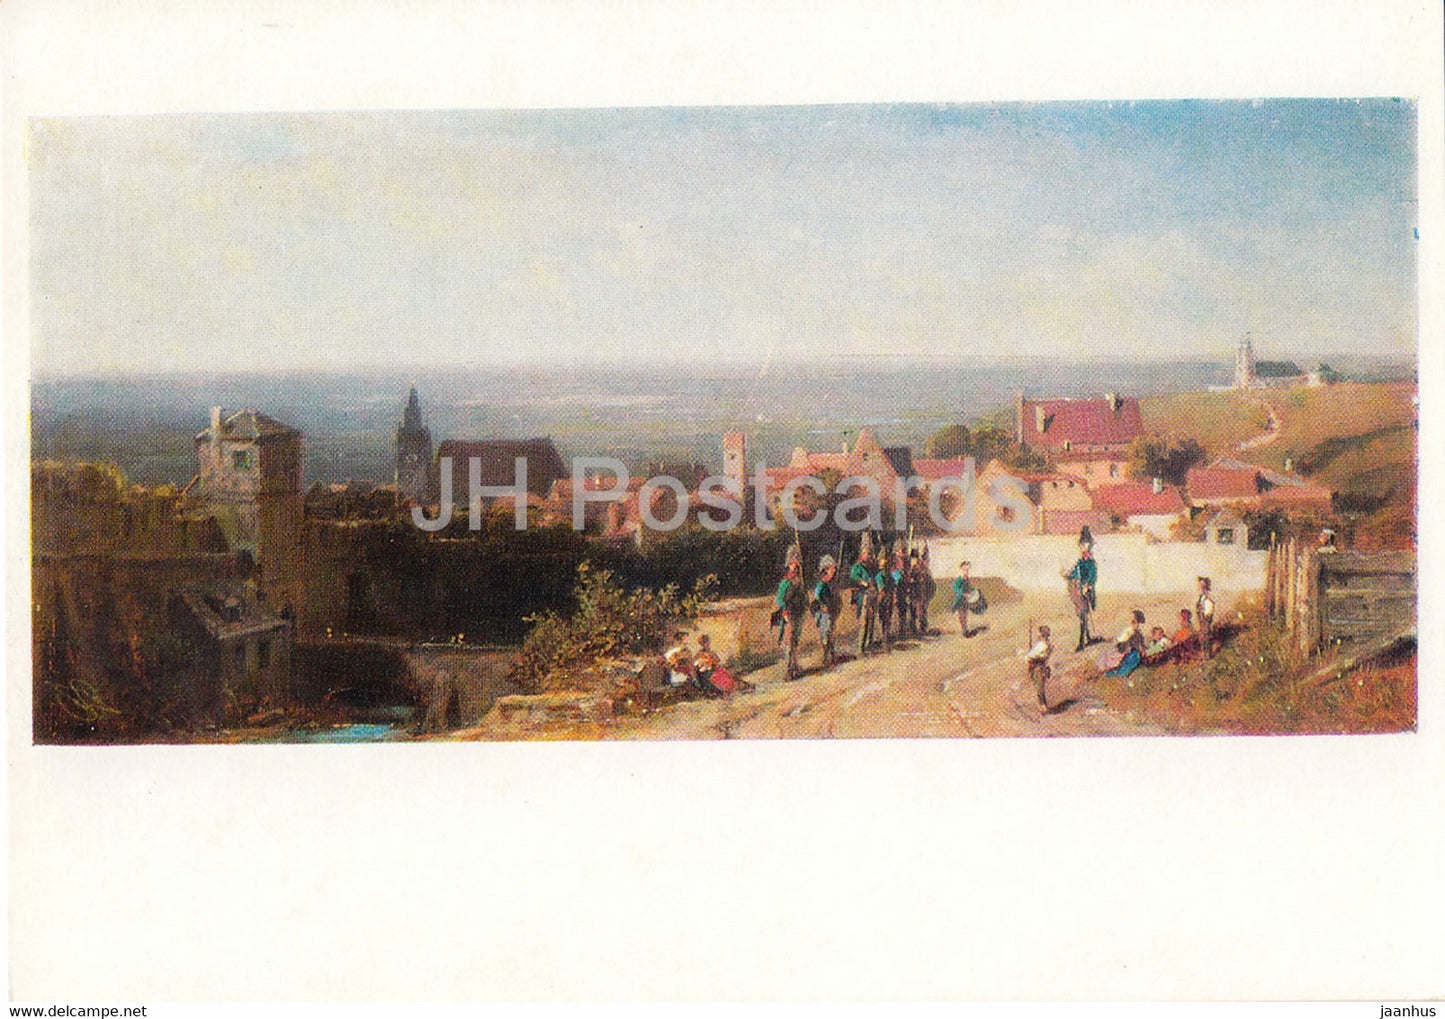 painting by Carl Spitzweg - Altes Stadtchen - Old Town - 1294 - German art - Germany DDR - unused - JH Postcards